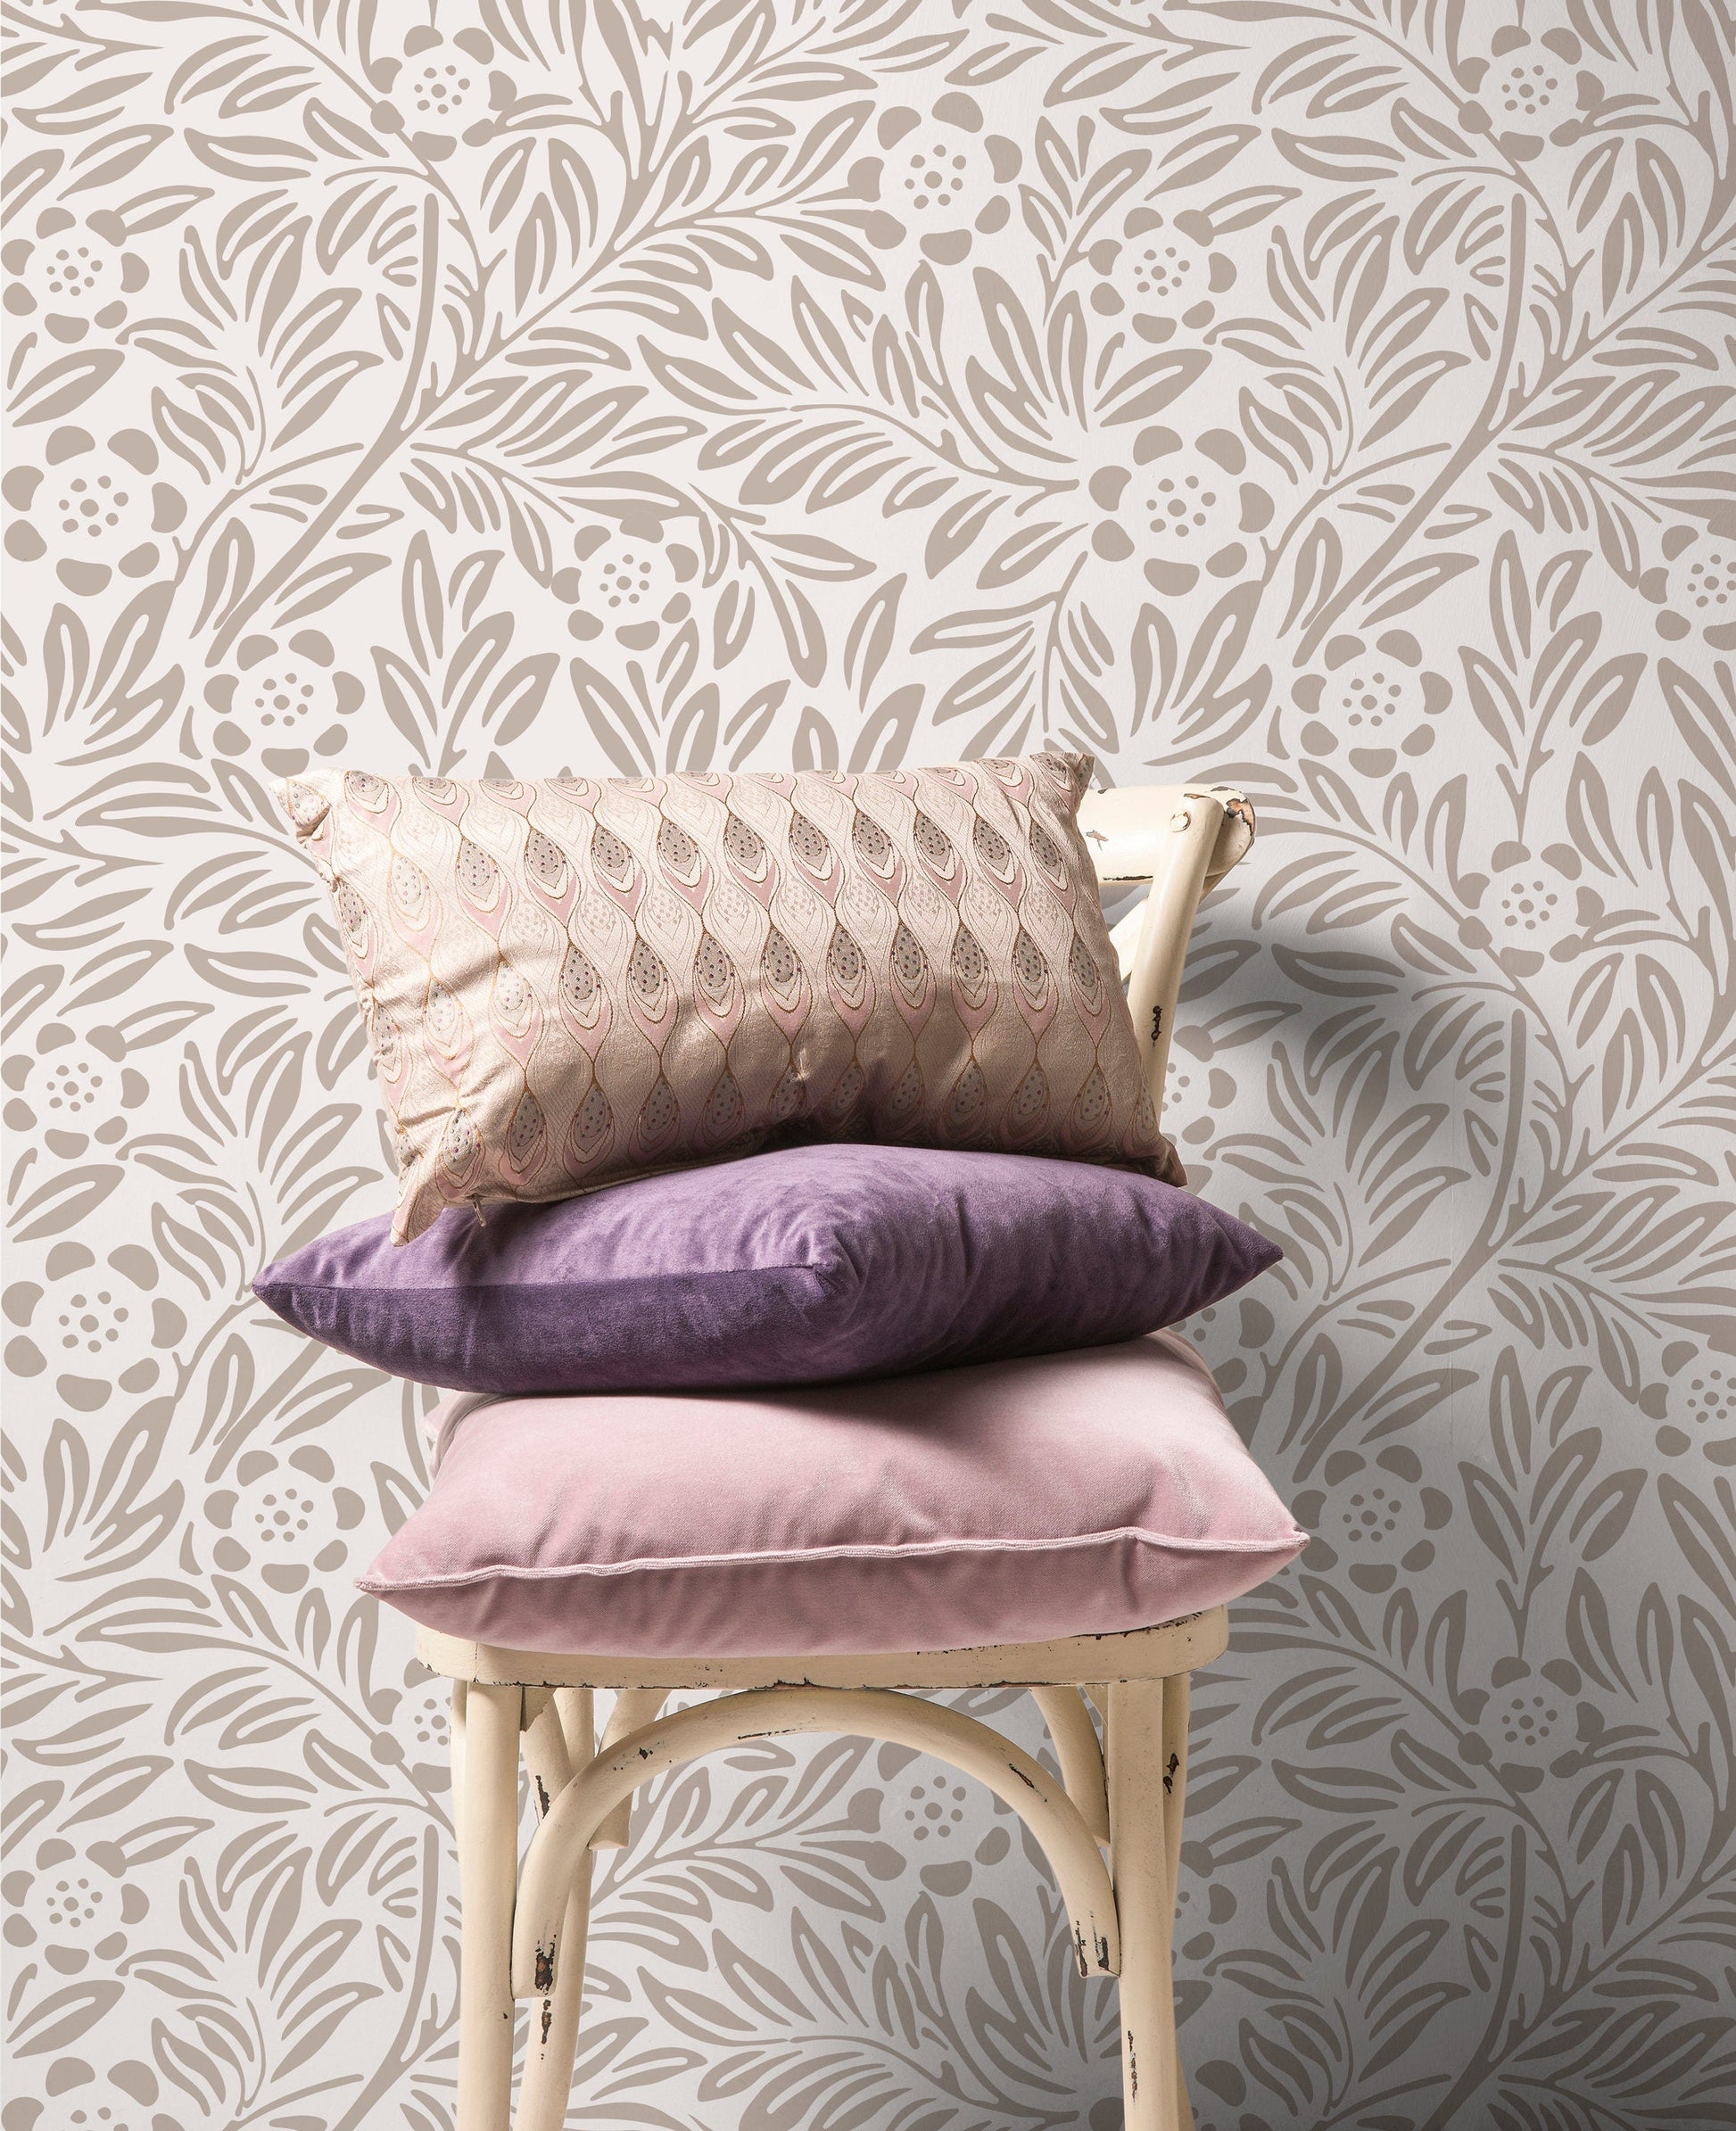 Removable Wallpaper Peel and Stick Wallpaper Wall Paper Wall Temporary Wallpaper Wall - C302